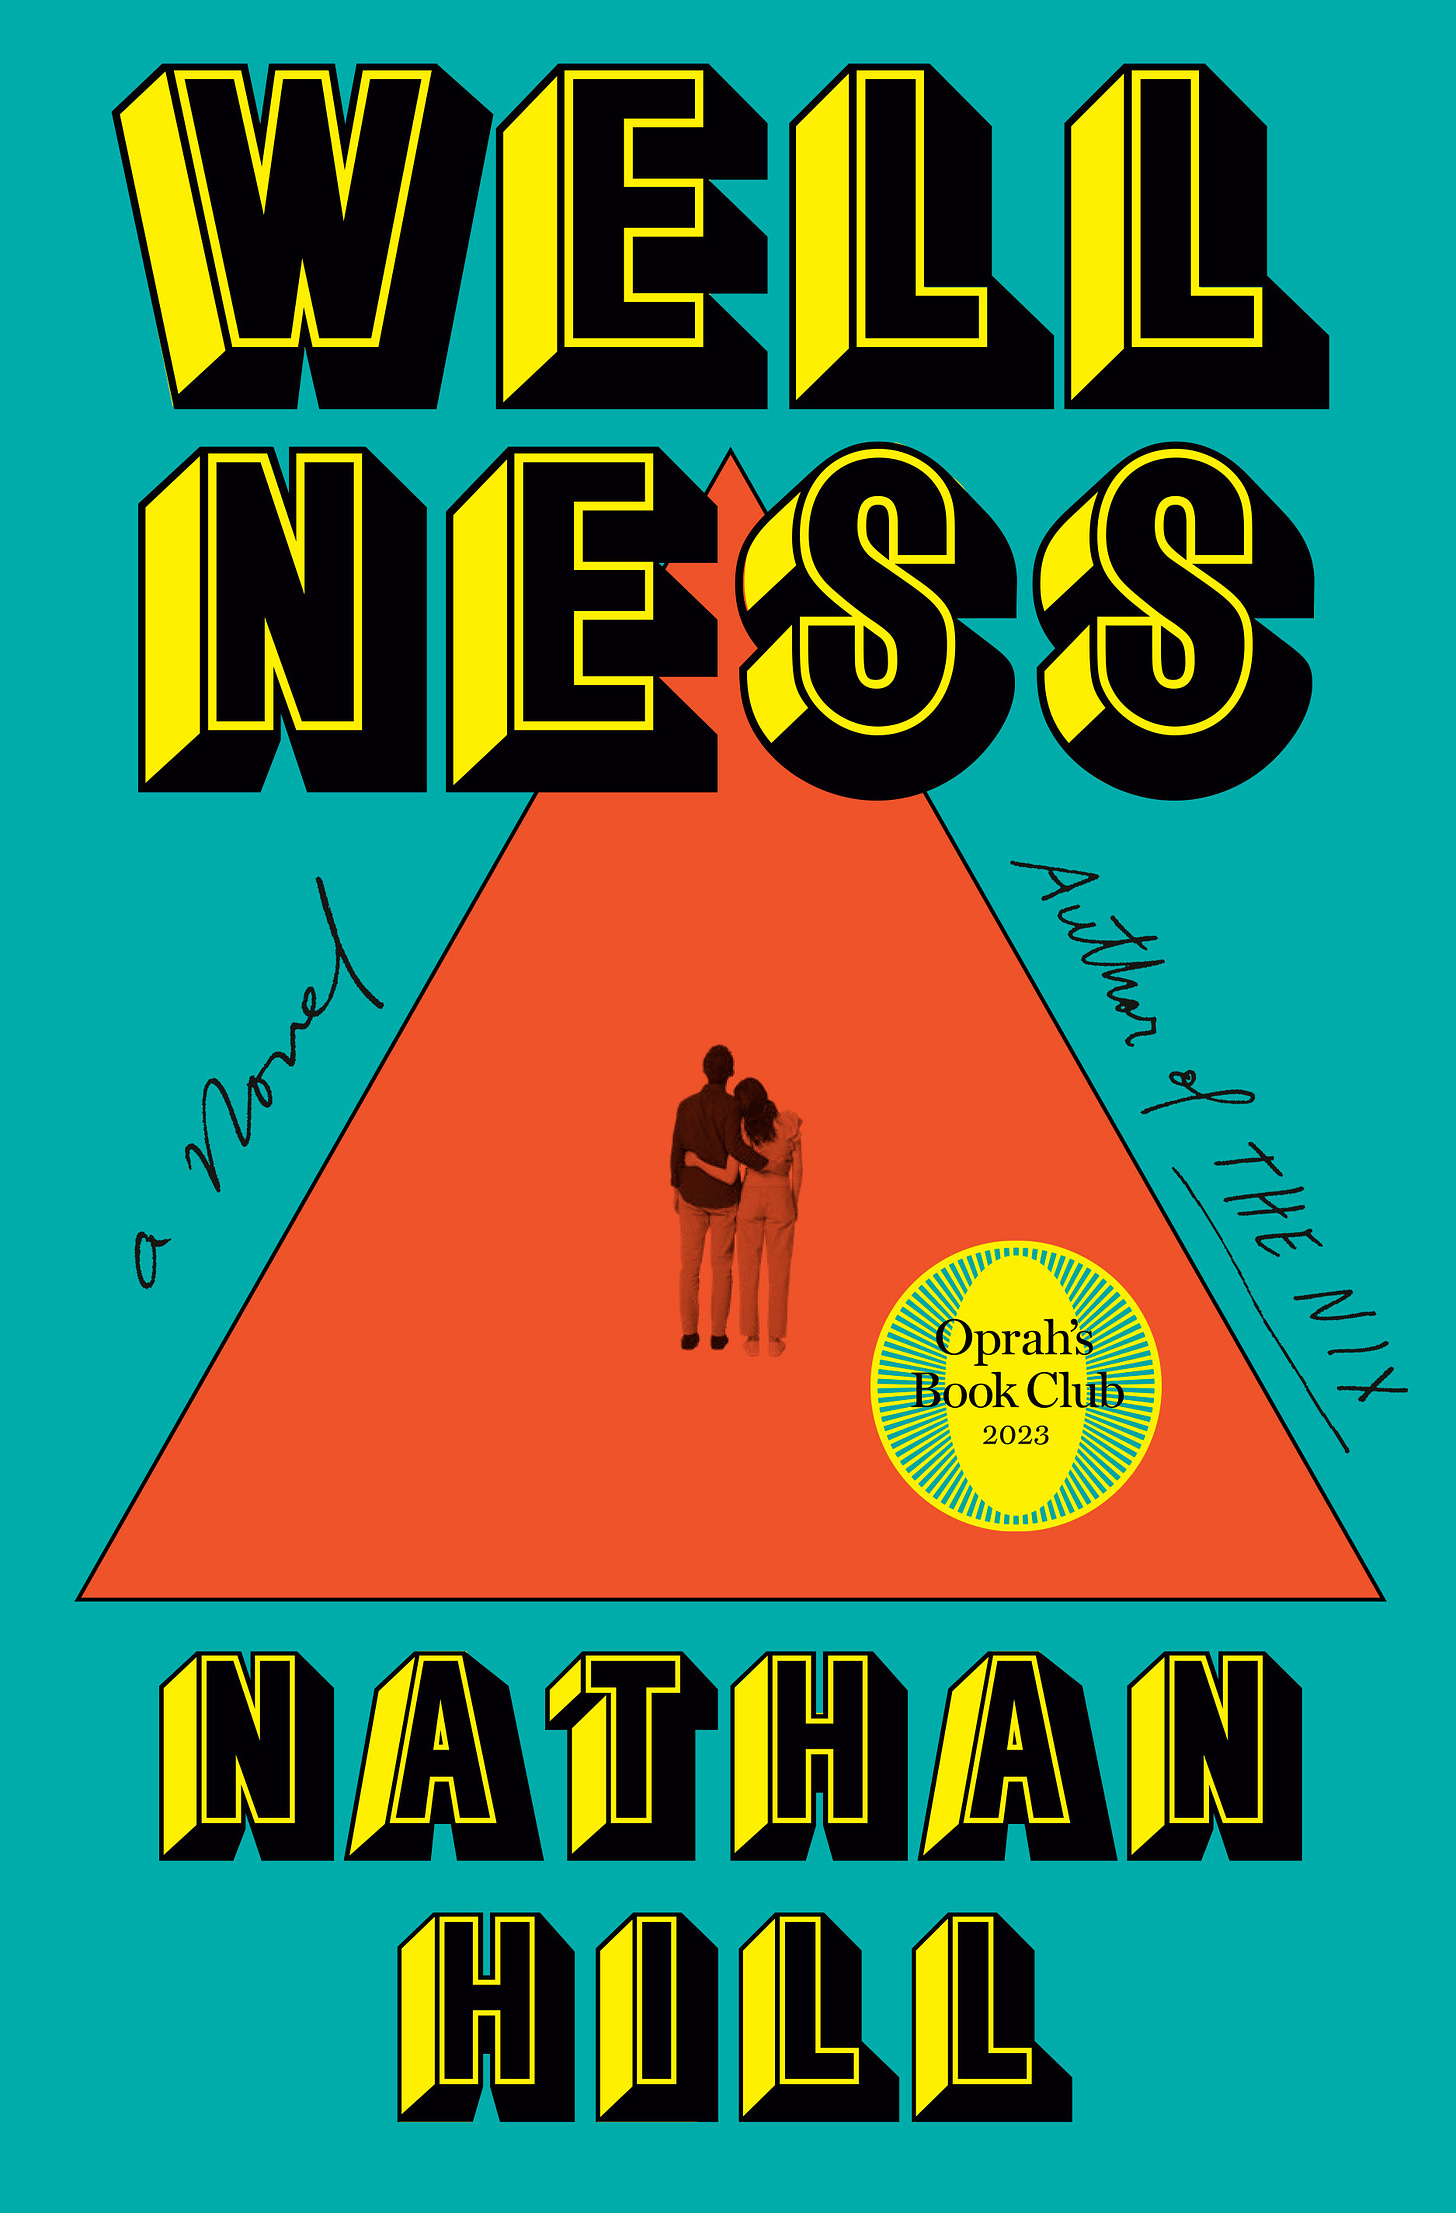 Image of the cover of Wellness by Nathan Hill, featuring the title and author name in large yellow and black text over a teal and orange backgound